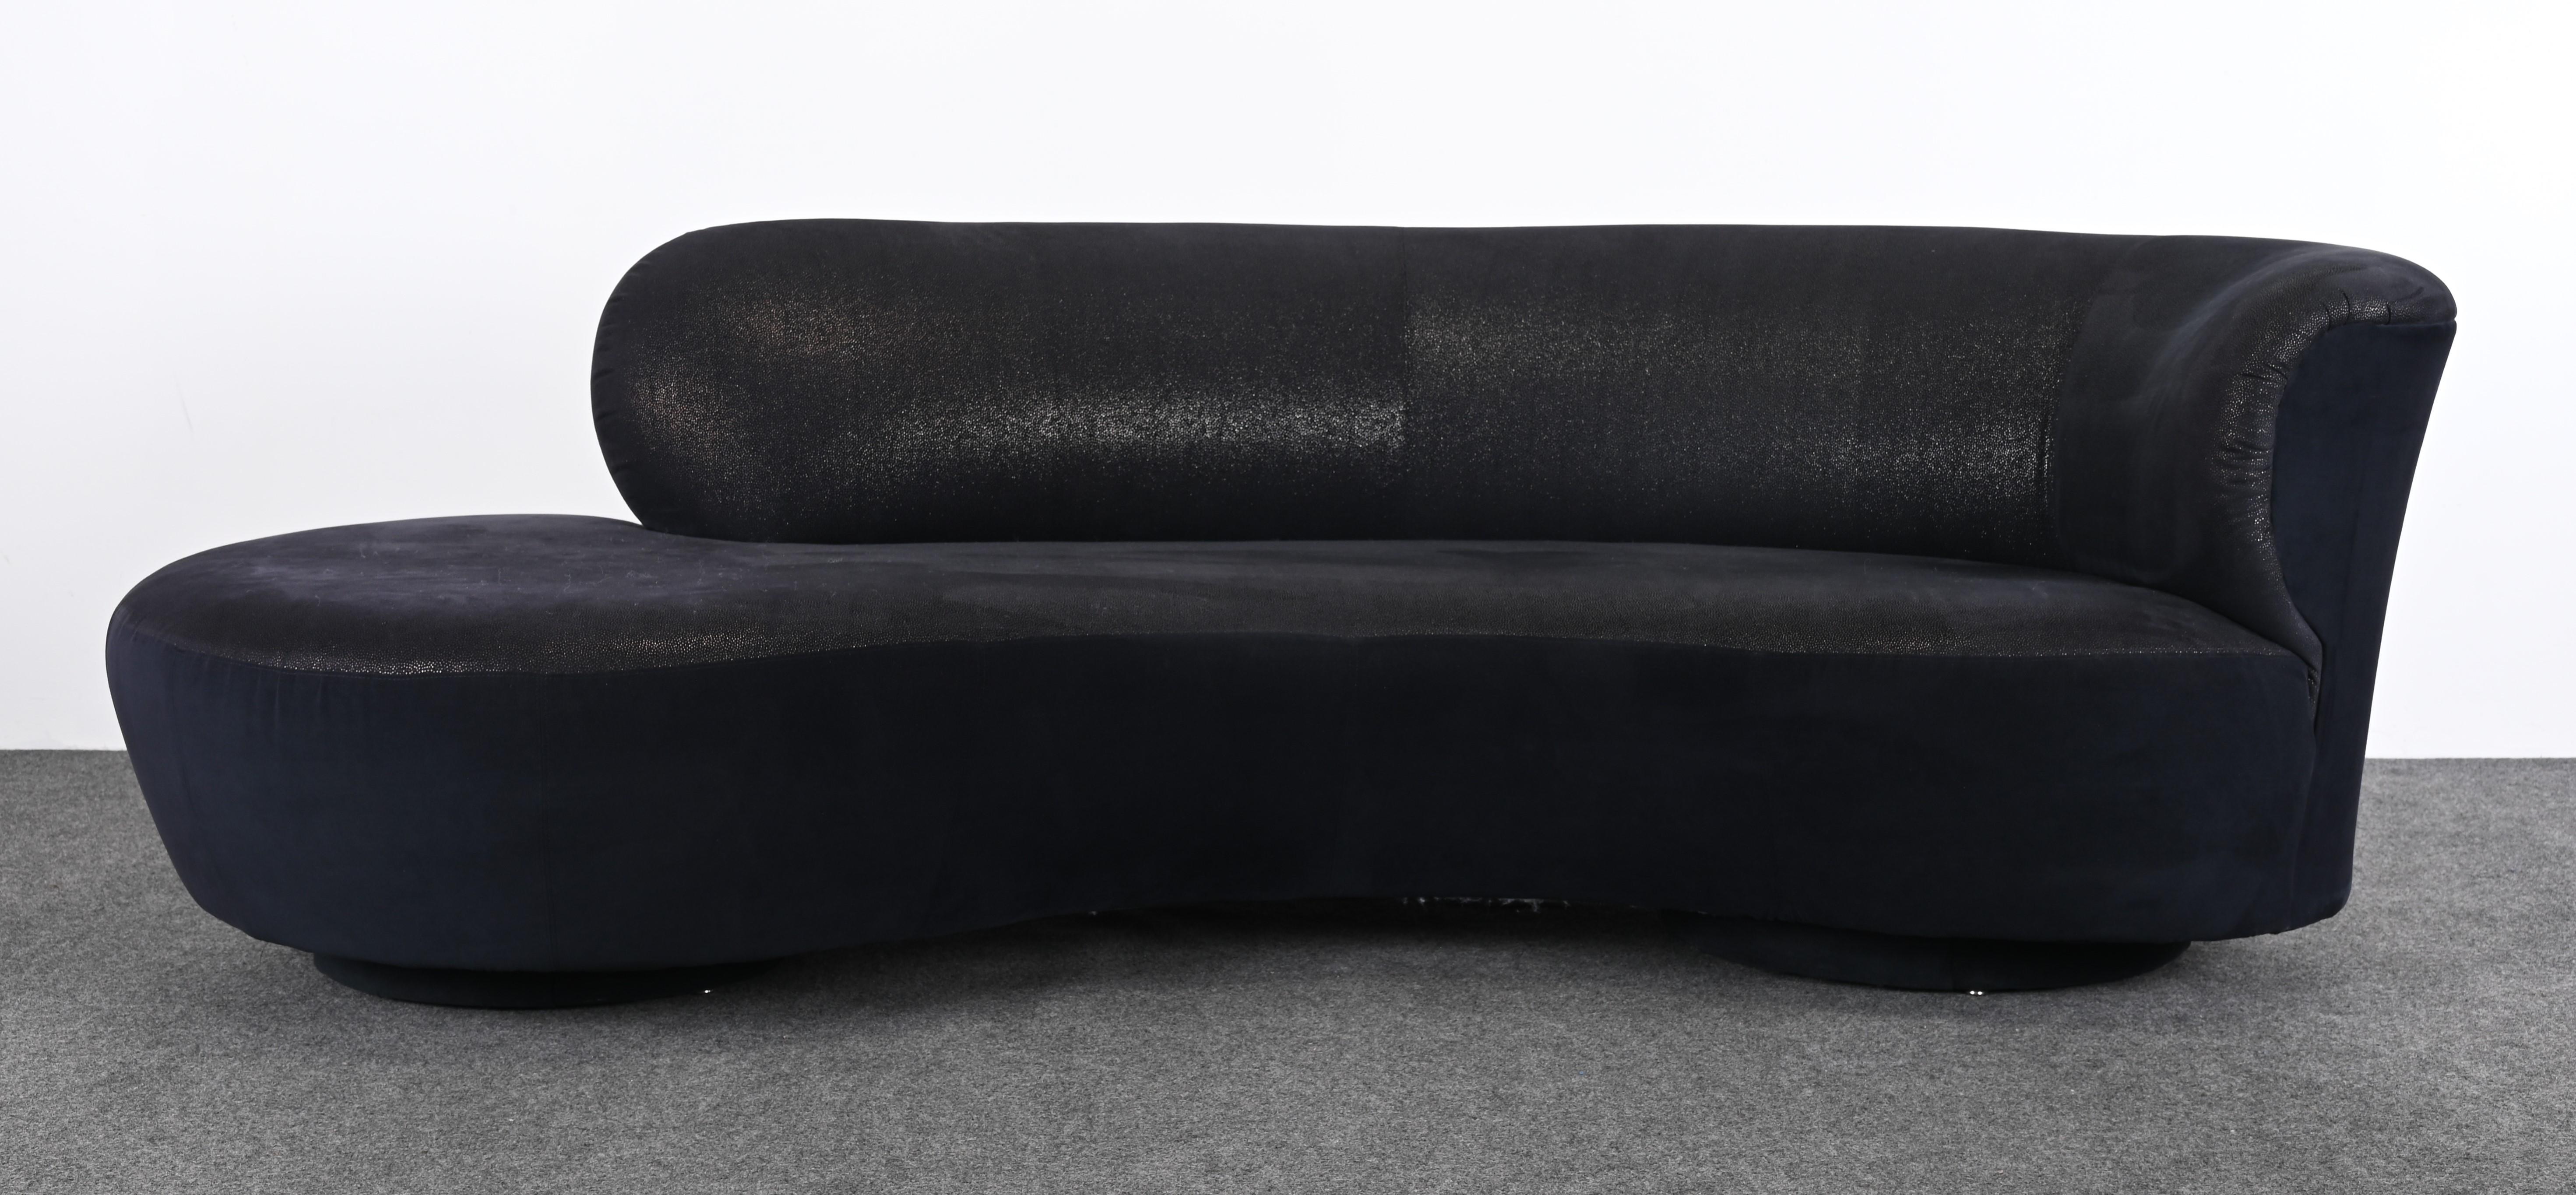 A vintage 1990s Serpentine Cloud Sofa in the manner of Vladimir Kagan. The fabric on the Cloud Sofa is supple, soft, and ready to place.  This sofa would look great in any Mid-Century Modern or Contemporary setting. This fabulous sofa is the sofa of